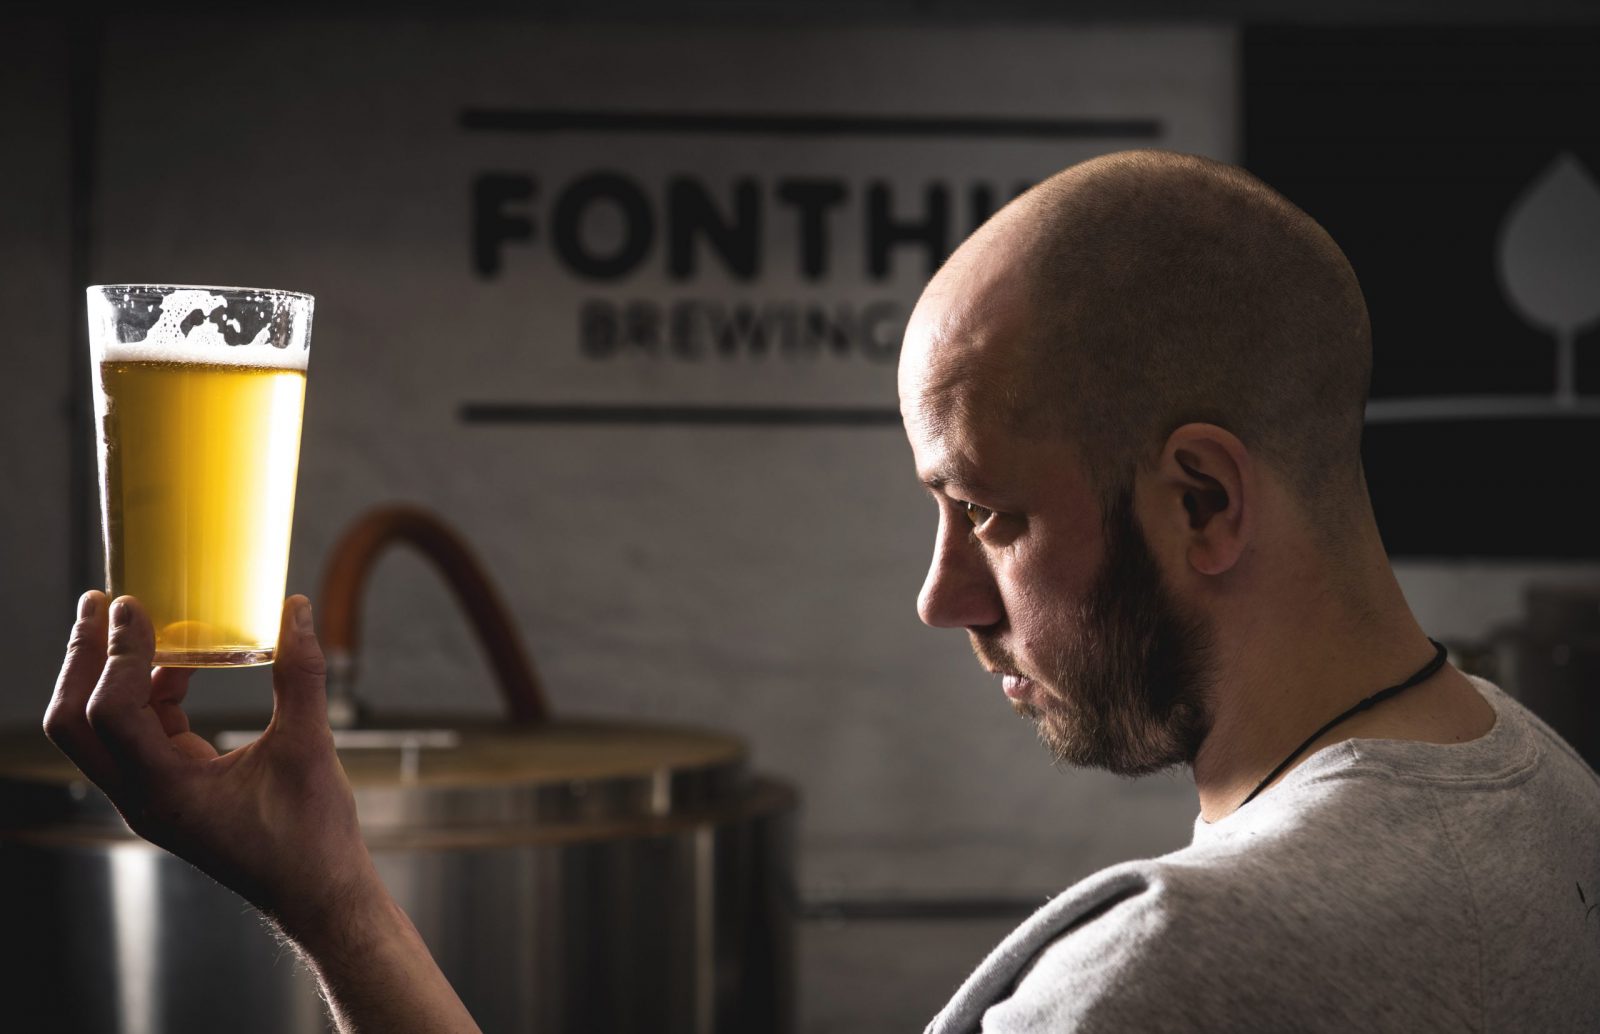 Fonthill Brewing Co's head brewer checks for clarity